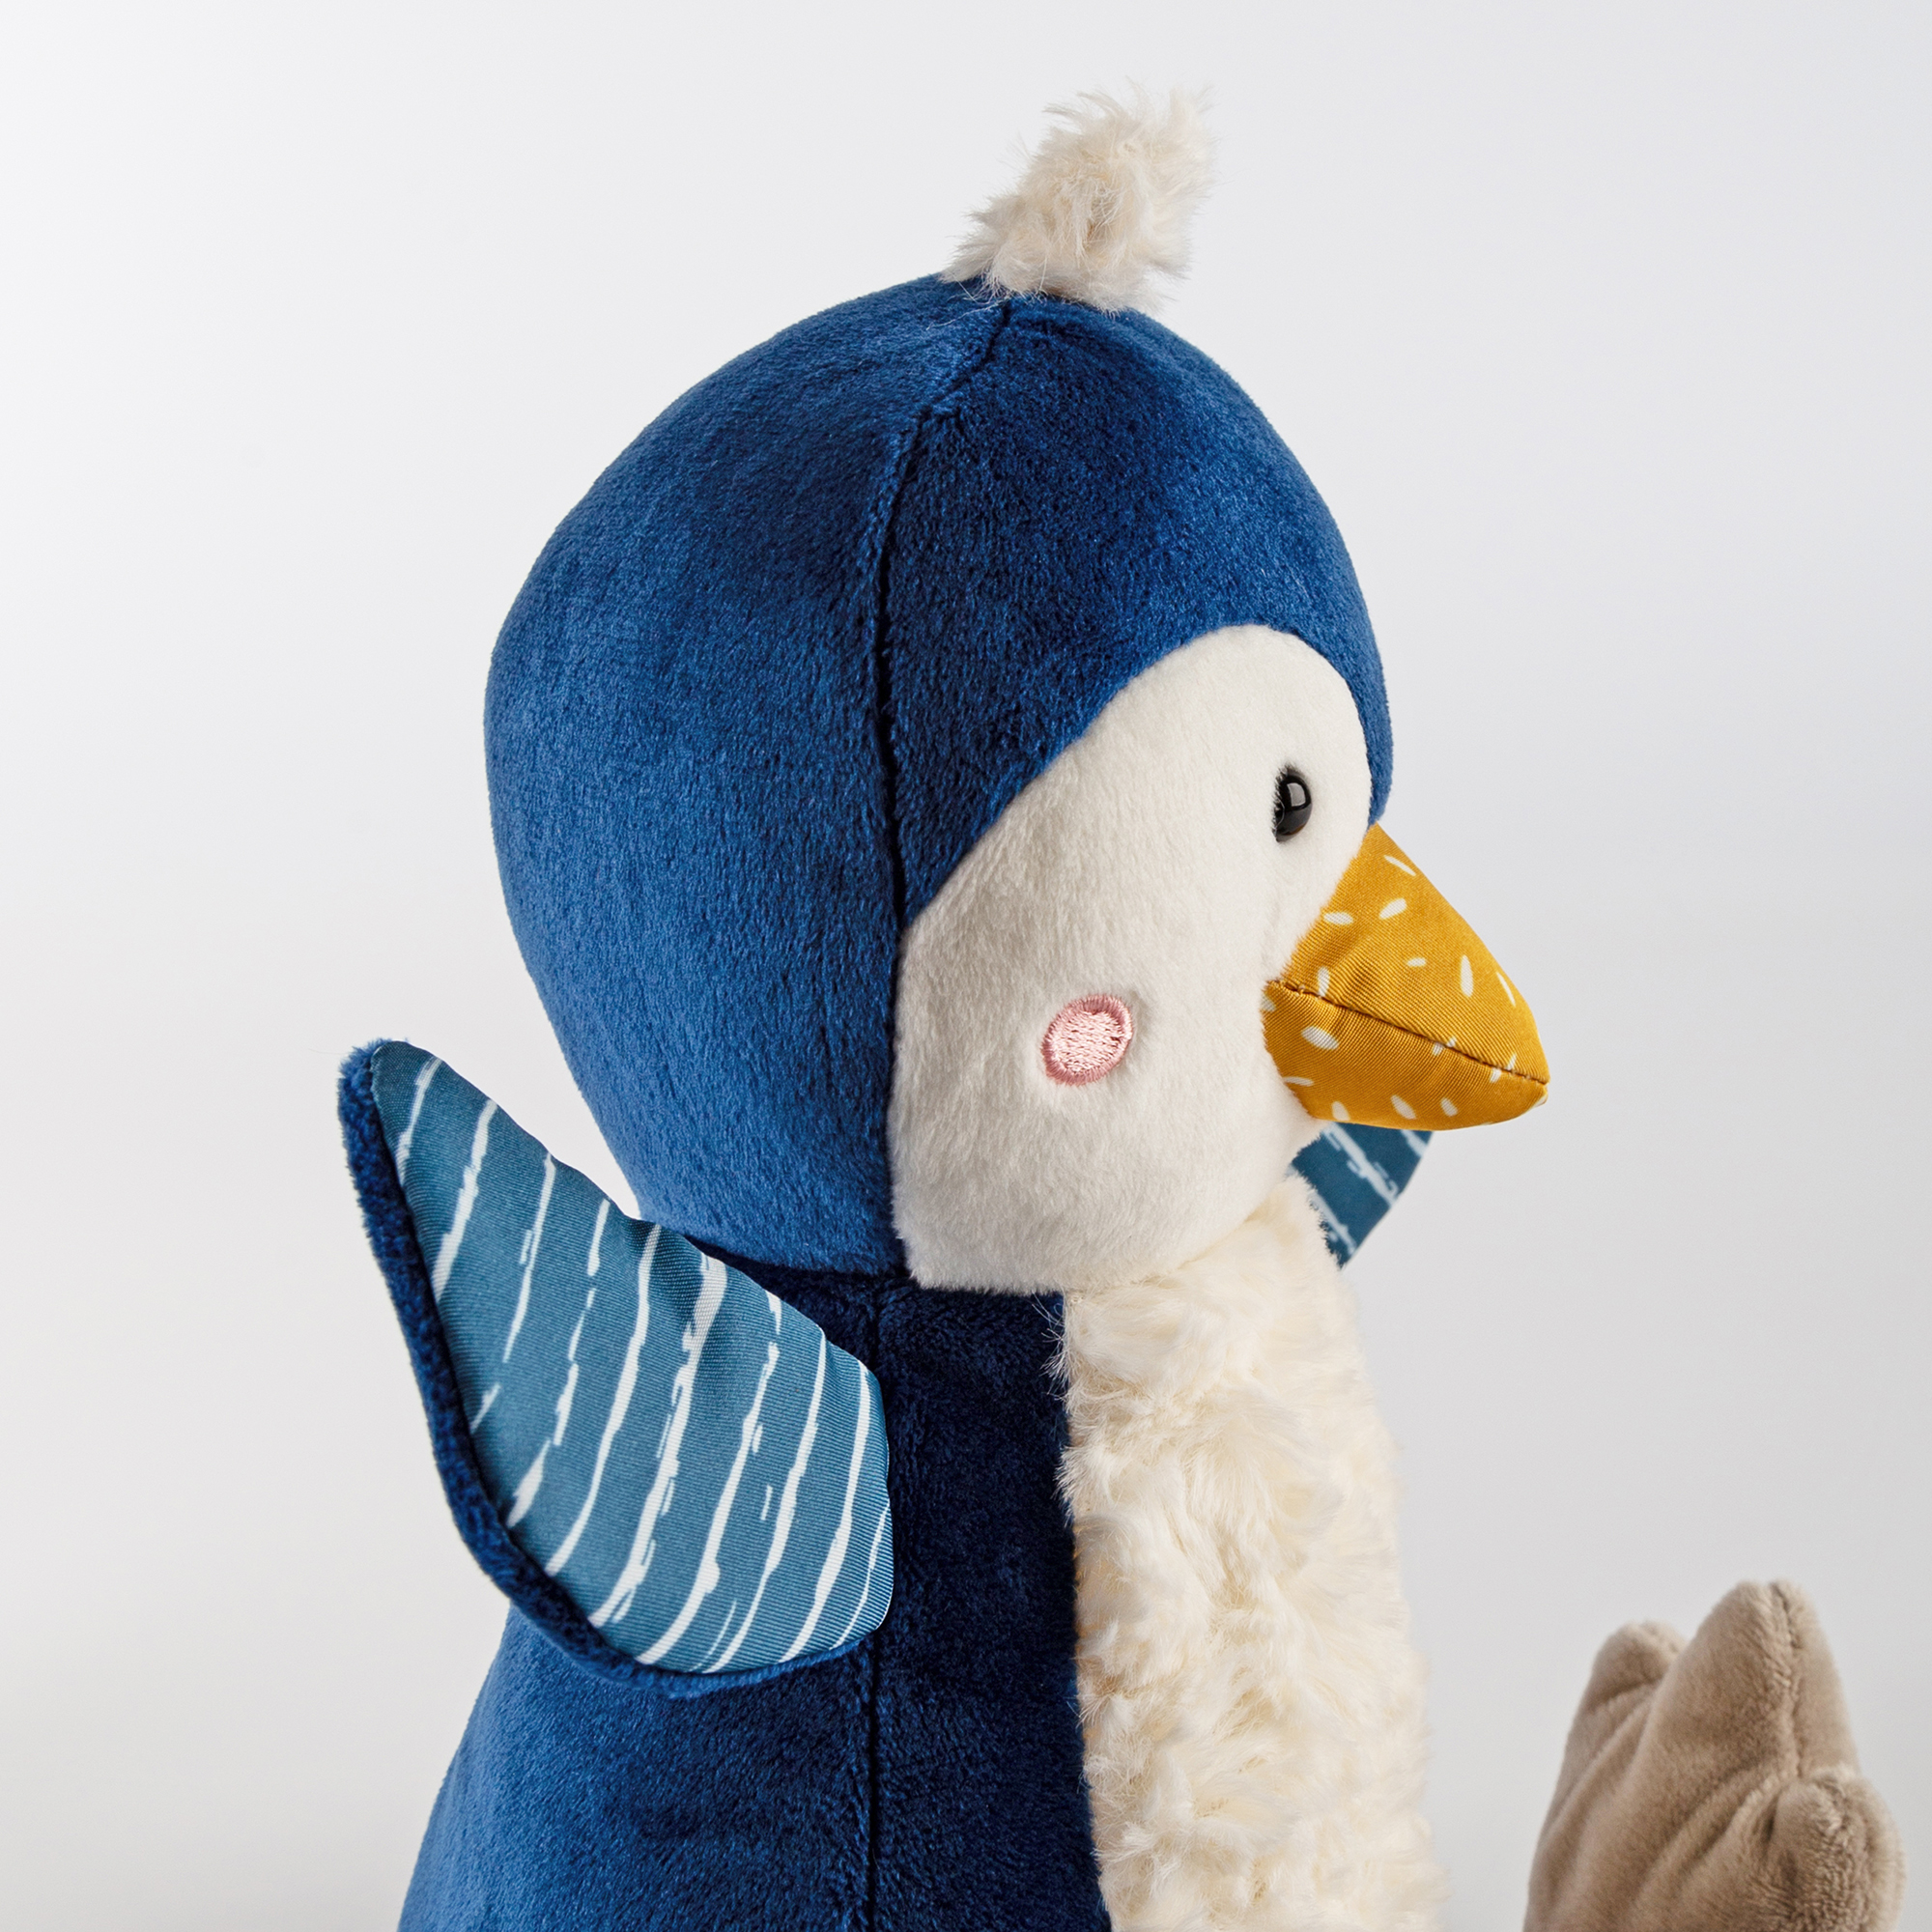 Plush toy penguin, Patchwork Sweety